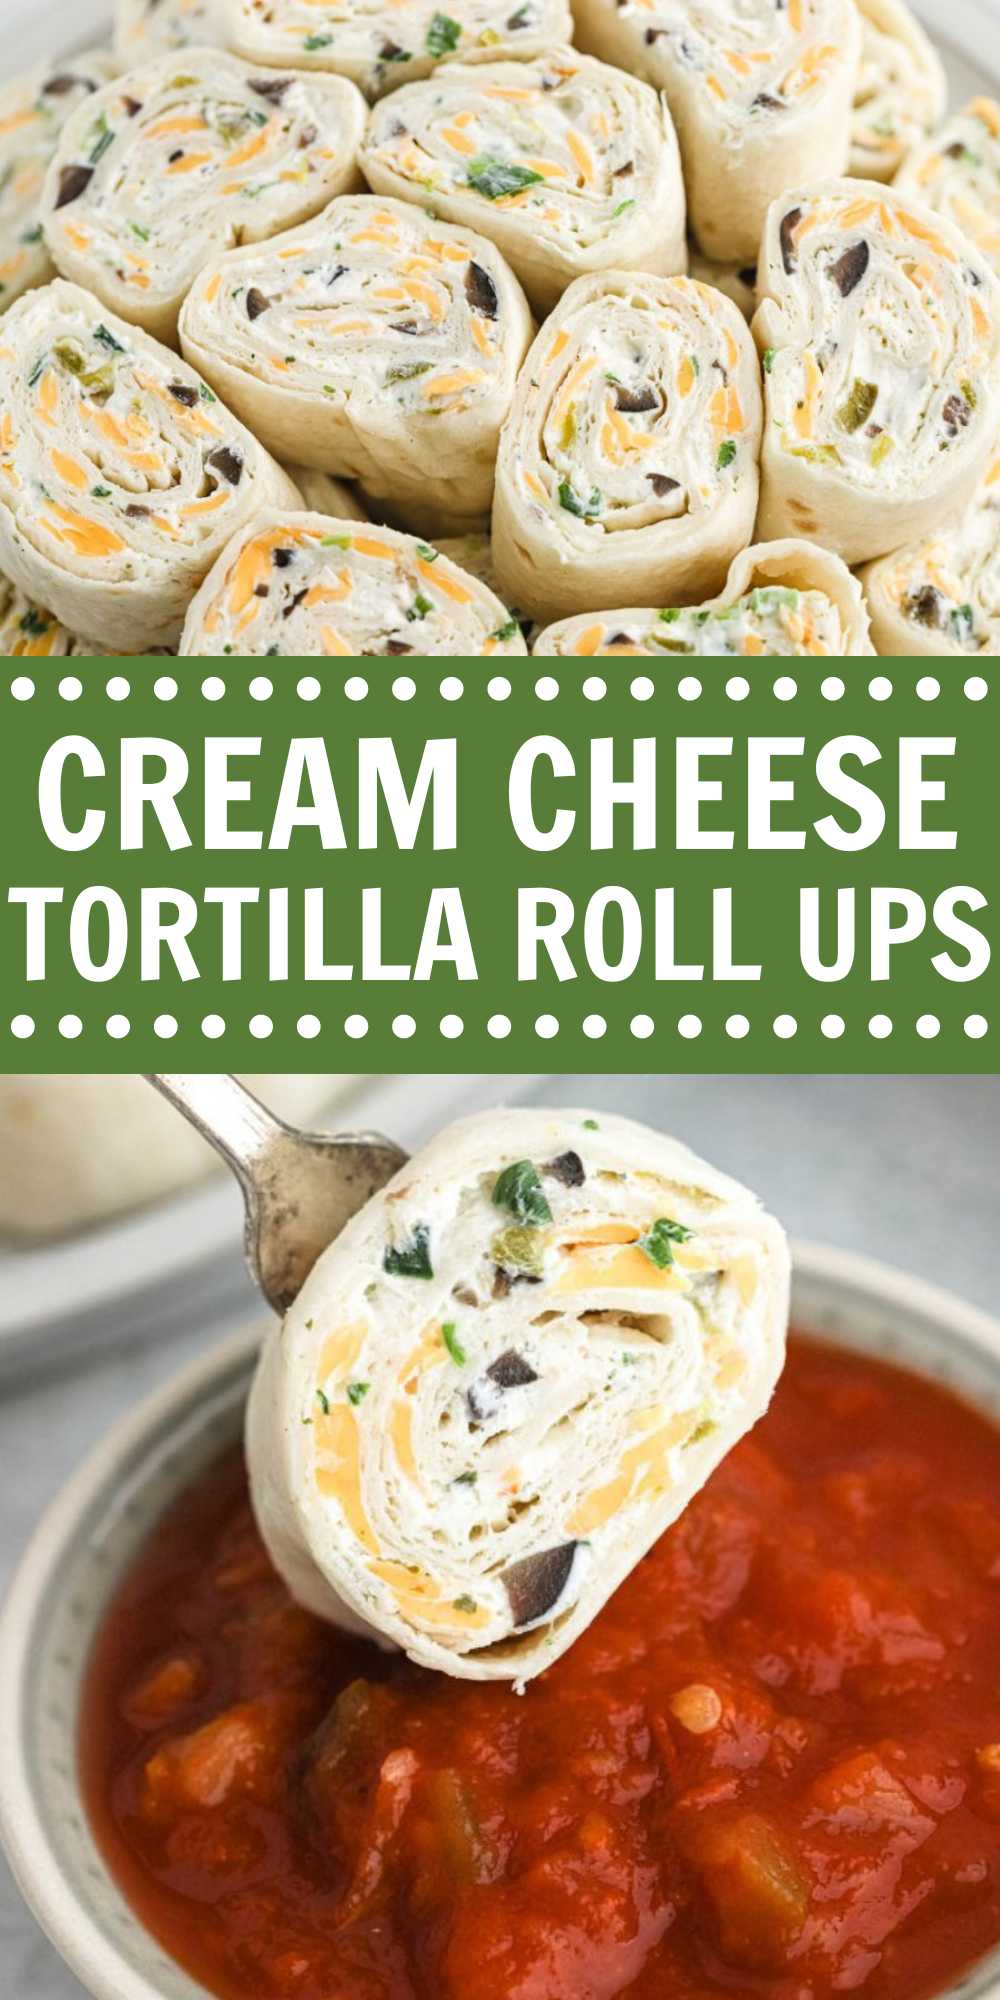 Cream Cheese Tortilla Roll Ups is the ultimate party appetizer. It is perfect bite size finger foods and is made with simple ingredients. These bite size appetizer can be prepared with a variety of ingredients to make for a last minute gathering. #eatingonadime #creamcheesetortillarollups #tortillarollups